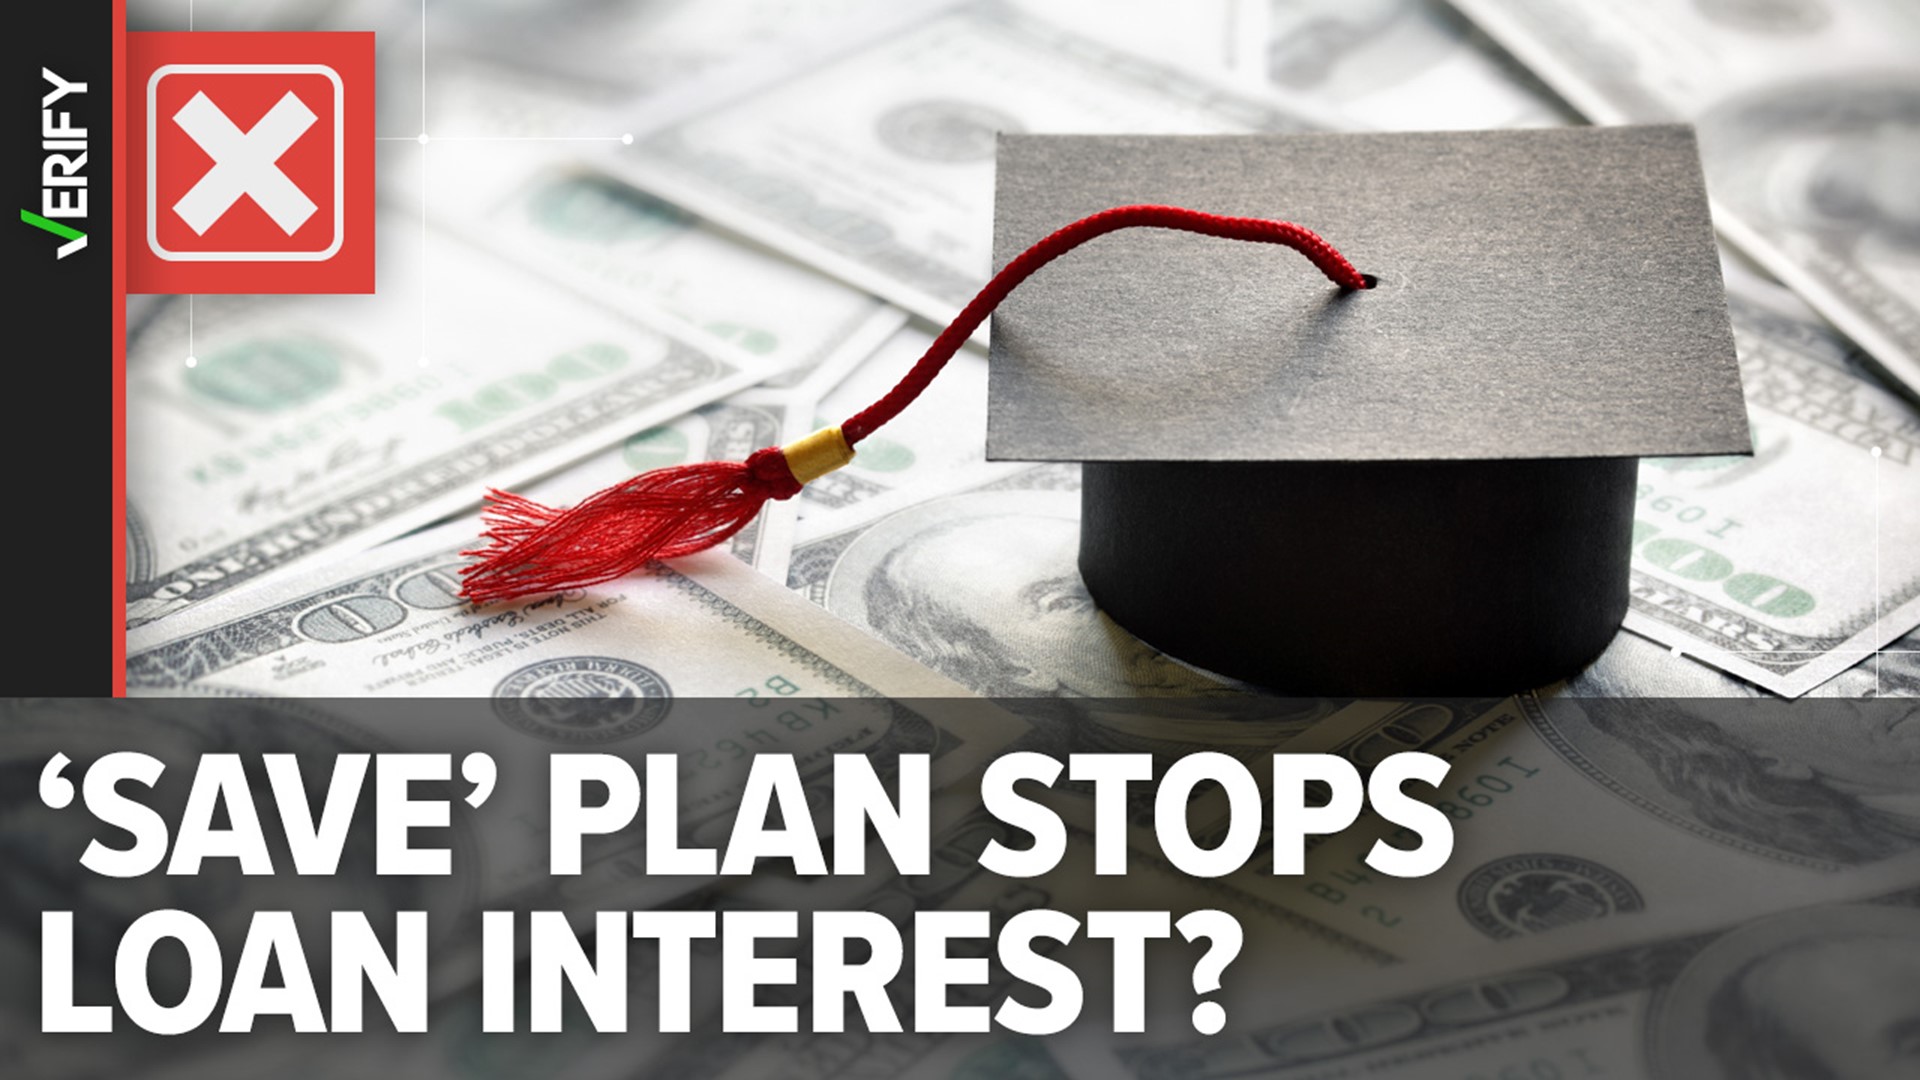 The 'Save' Plan aims to make student loan payments more affordable, but it doesn't stop interest from accruing.